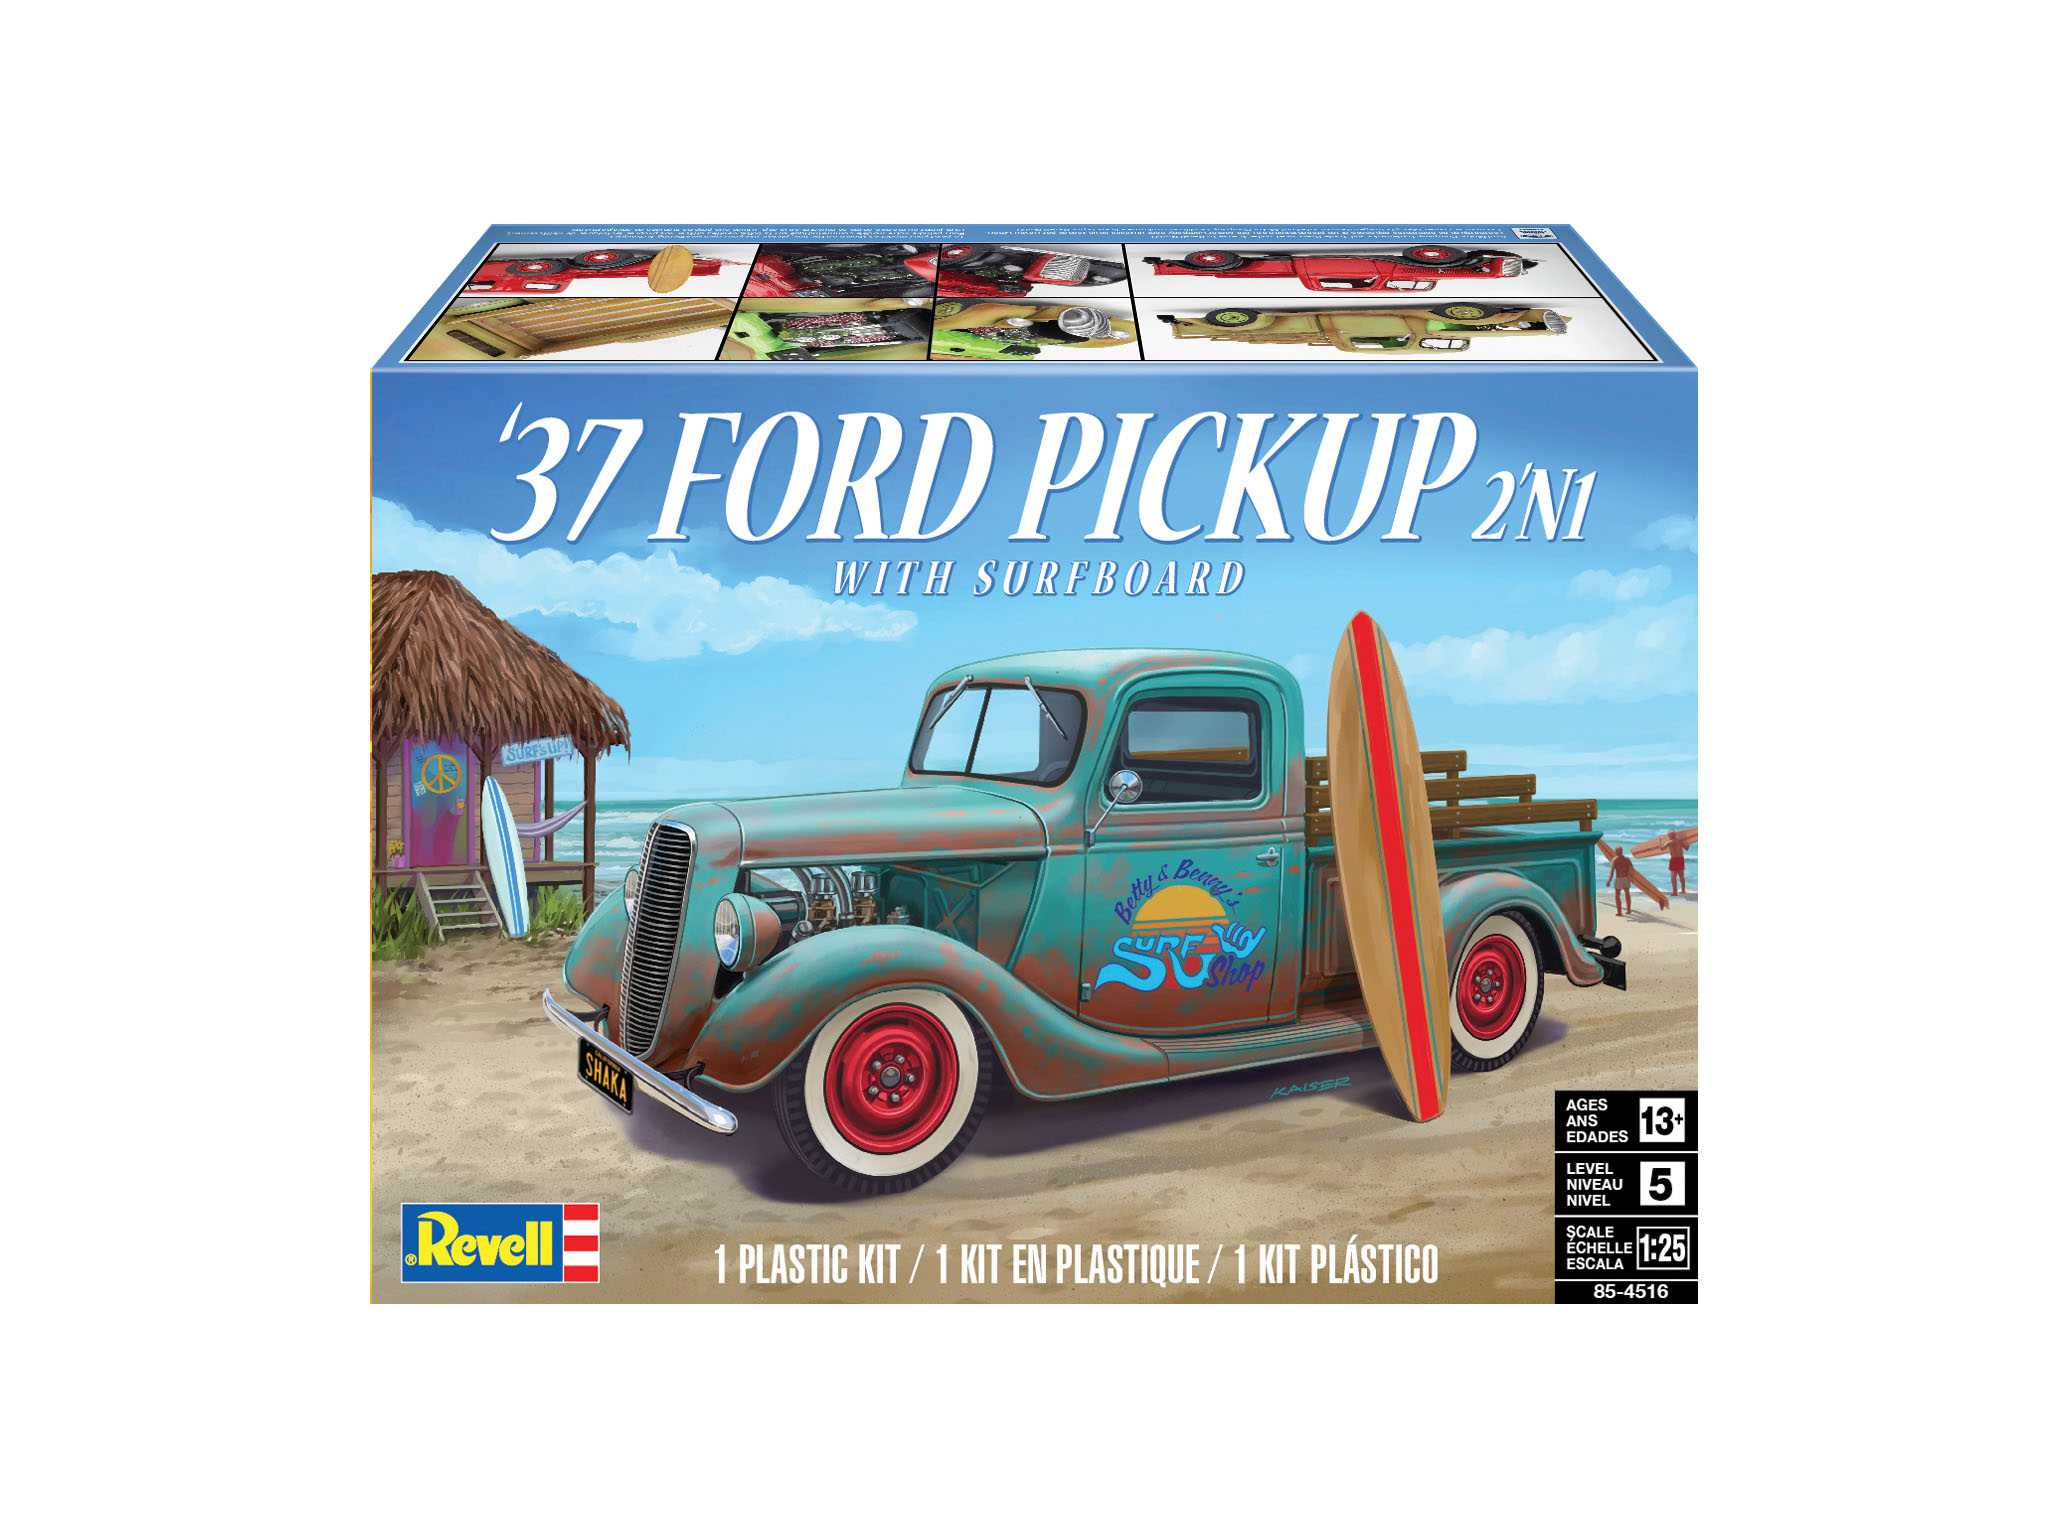 Revell Plastic ModelKit MONOGRAM auto 4516 - 1937 Ford Pickup Street Rod with Surf Board (1:25)